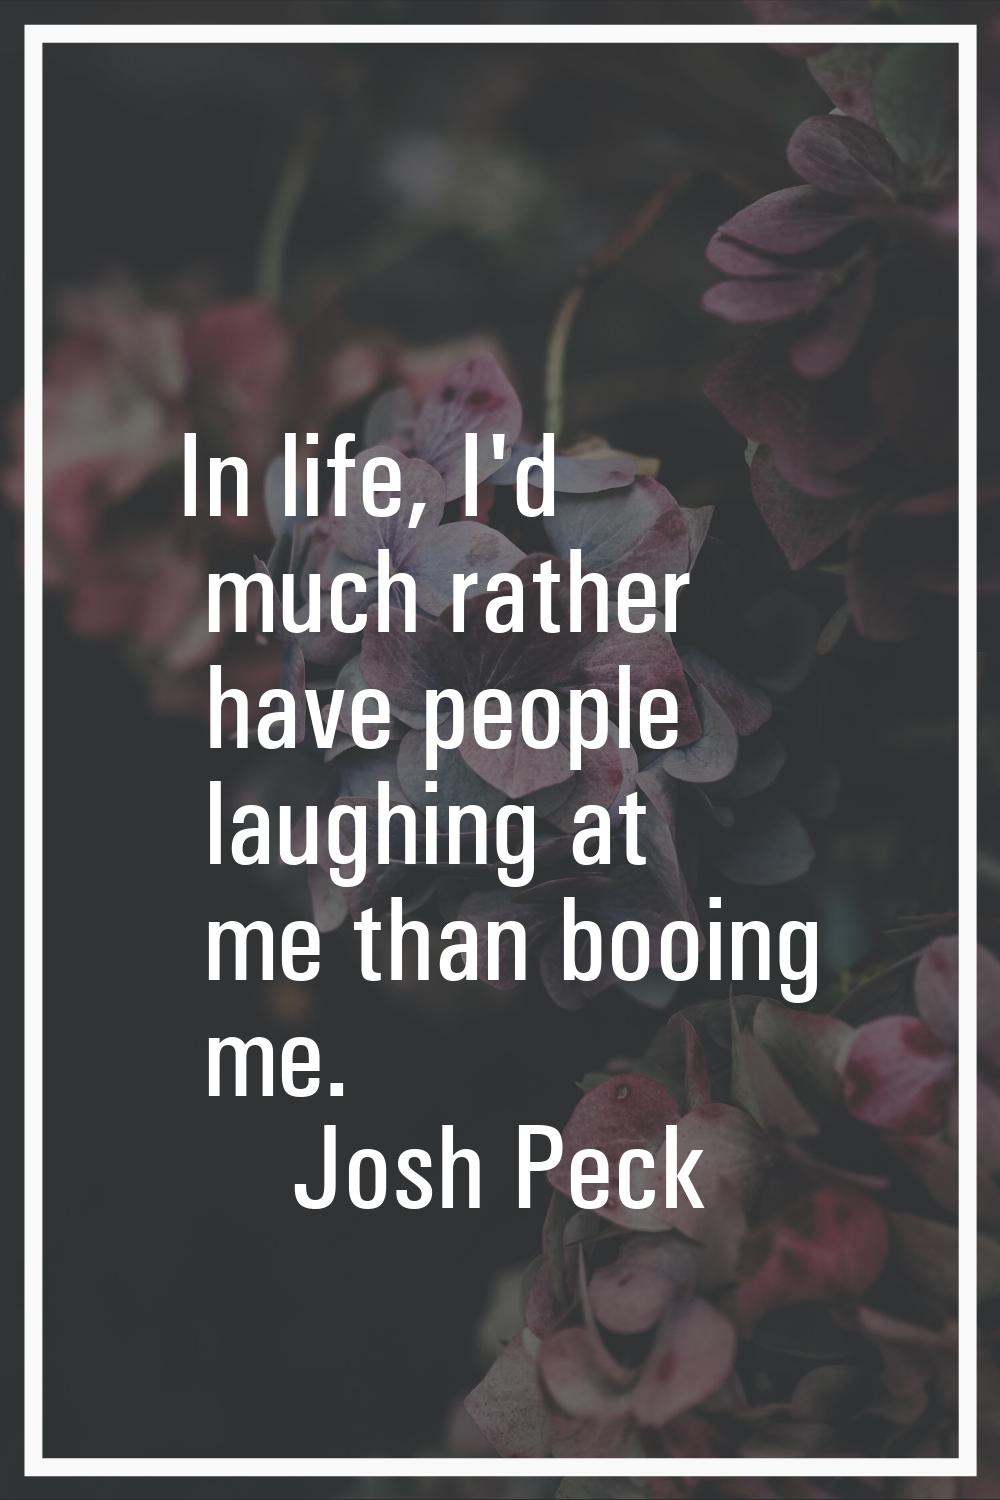 In life, I'd much rather have people laughing at me than booing me.